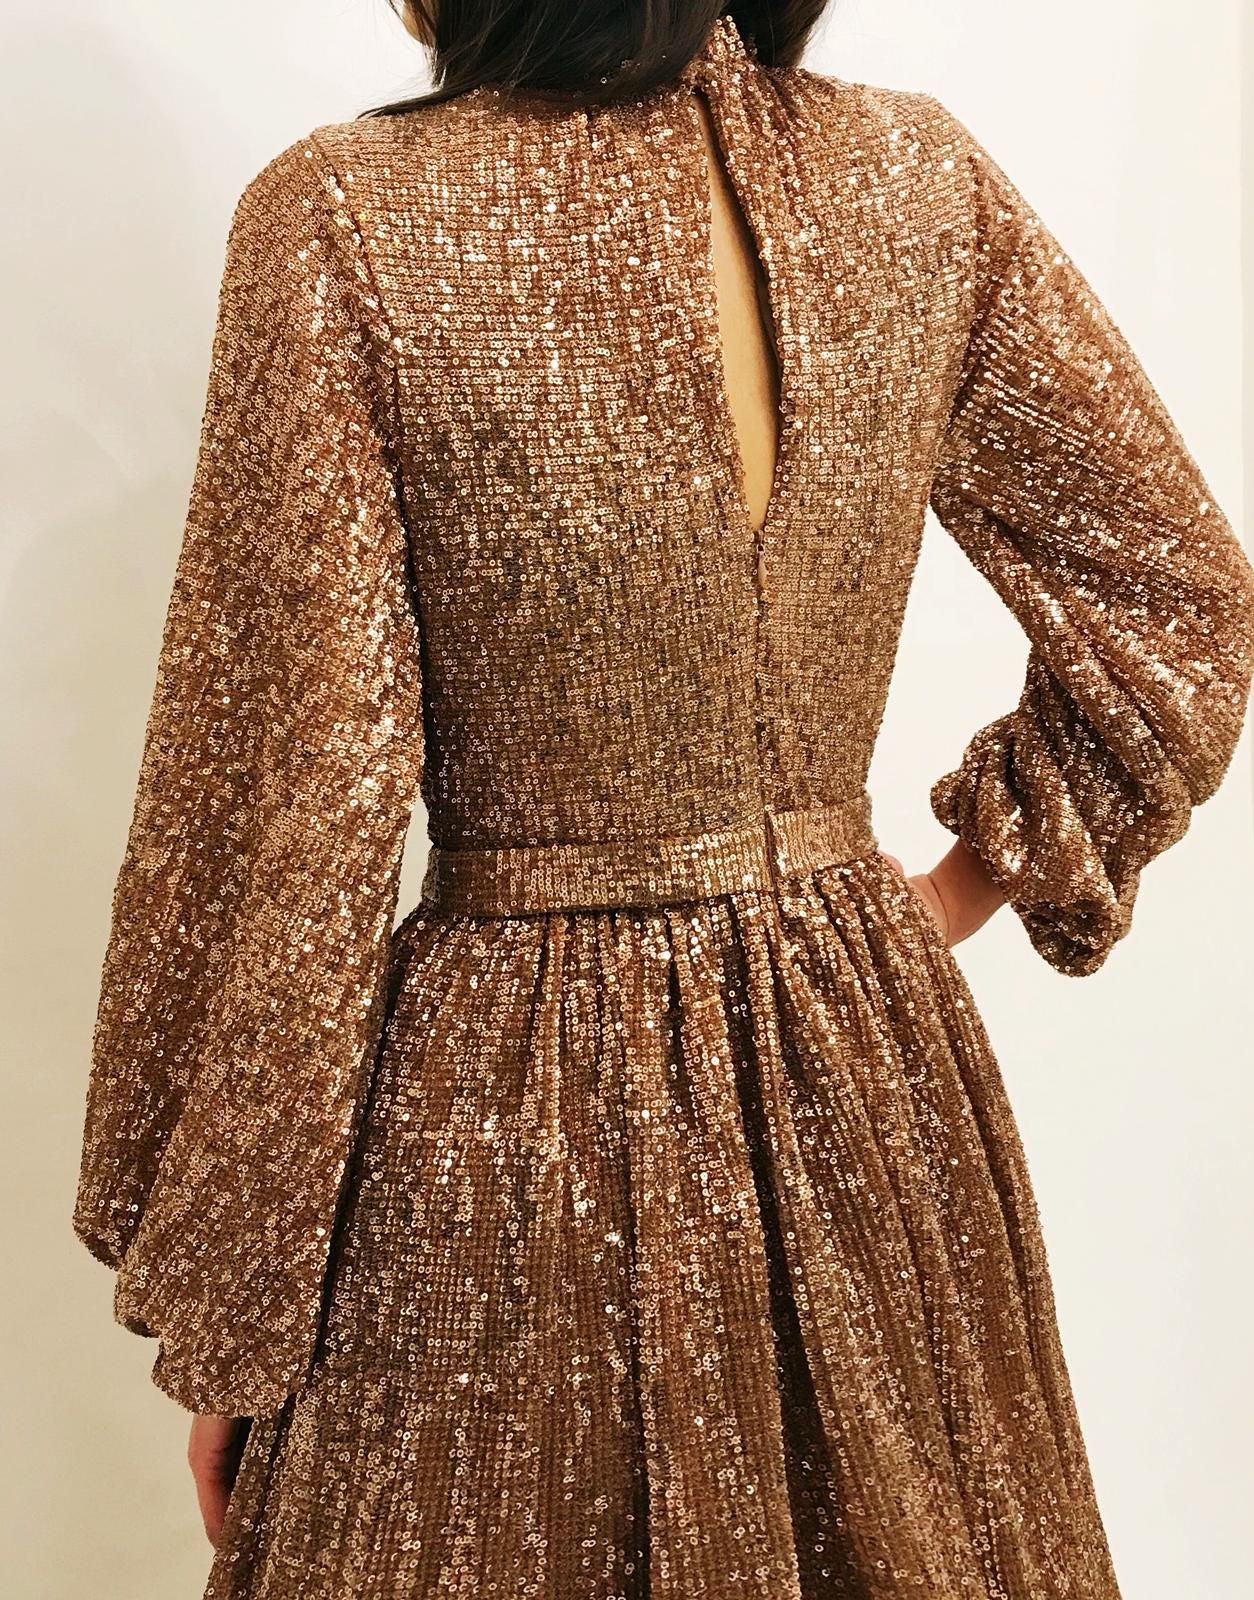 Brown sheath dress with long sleeves and sequins